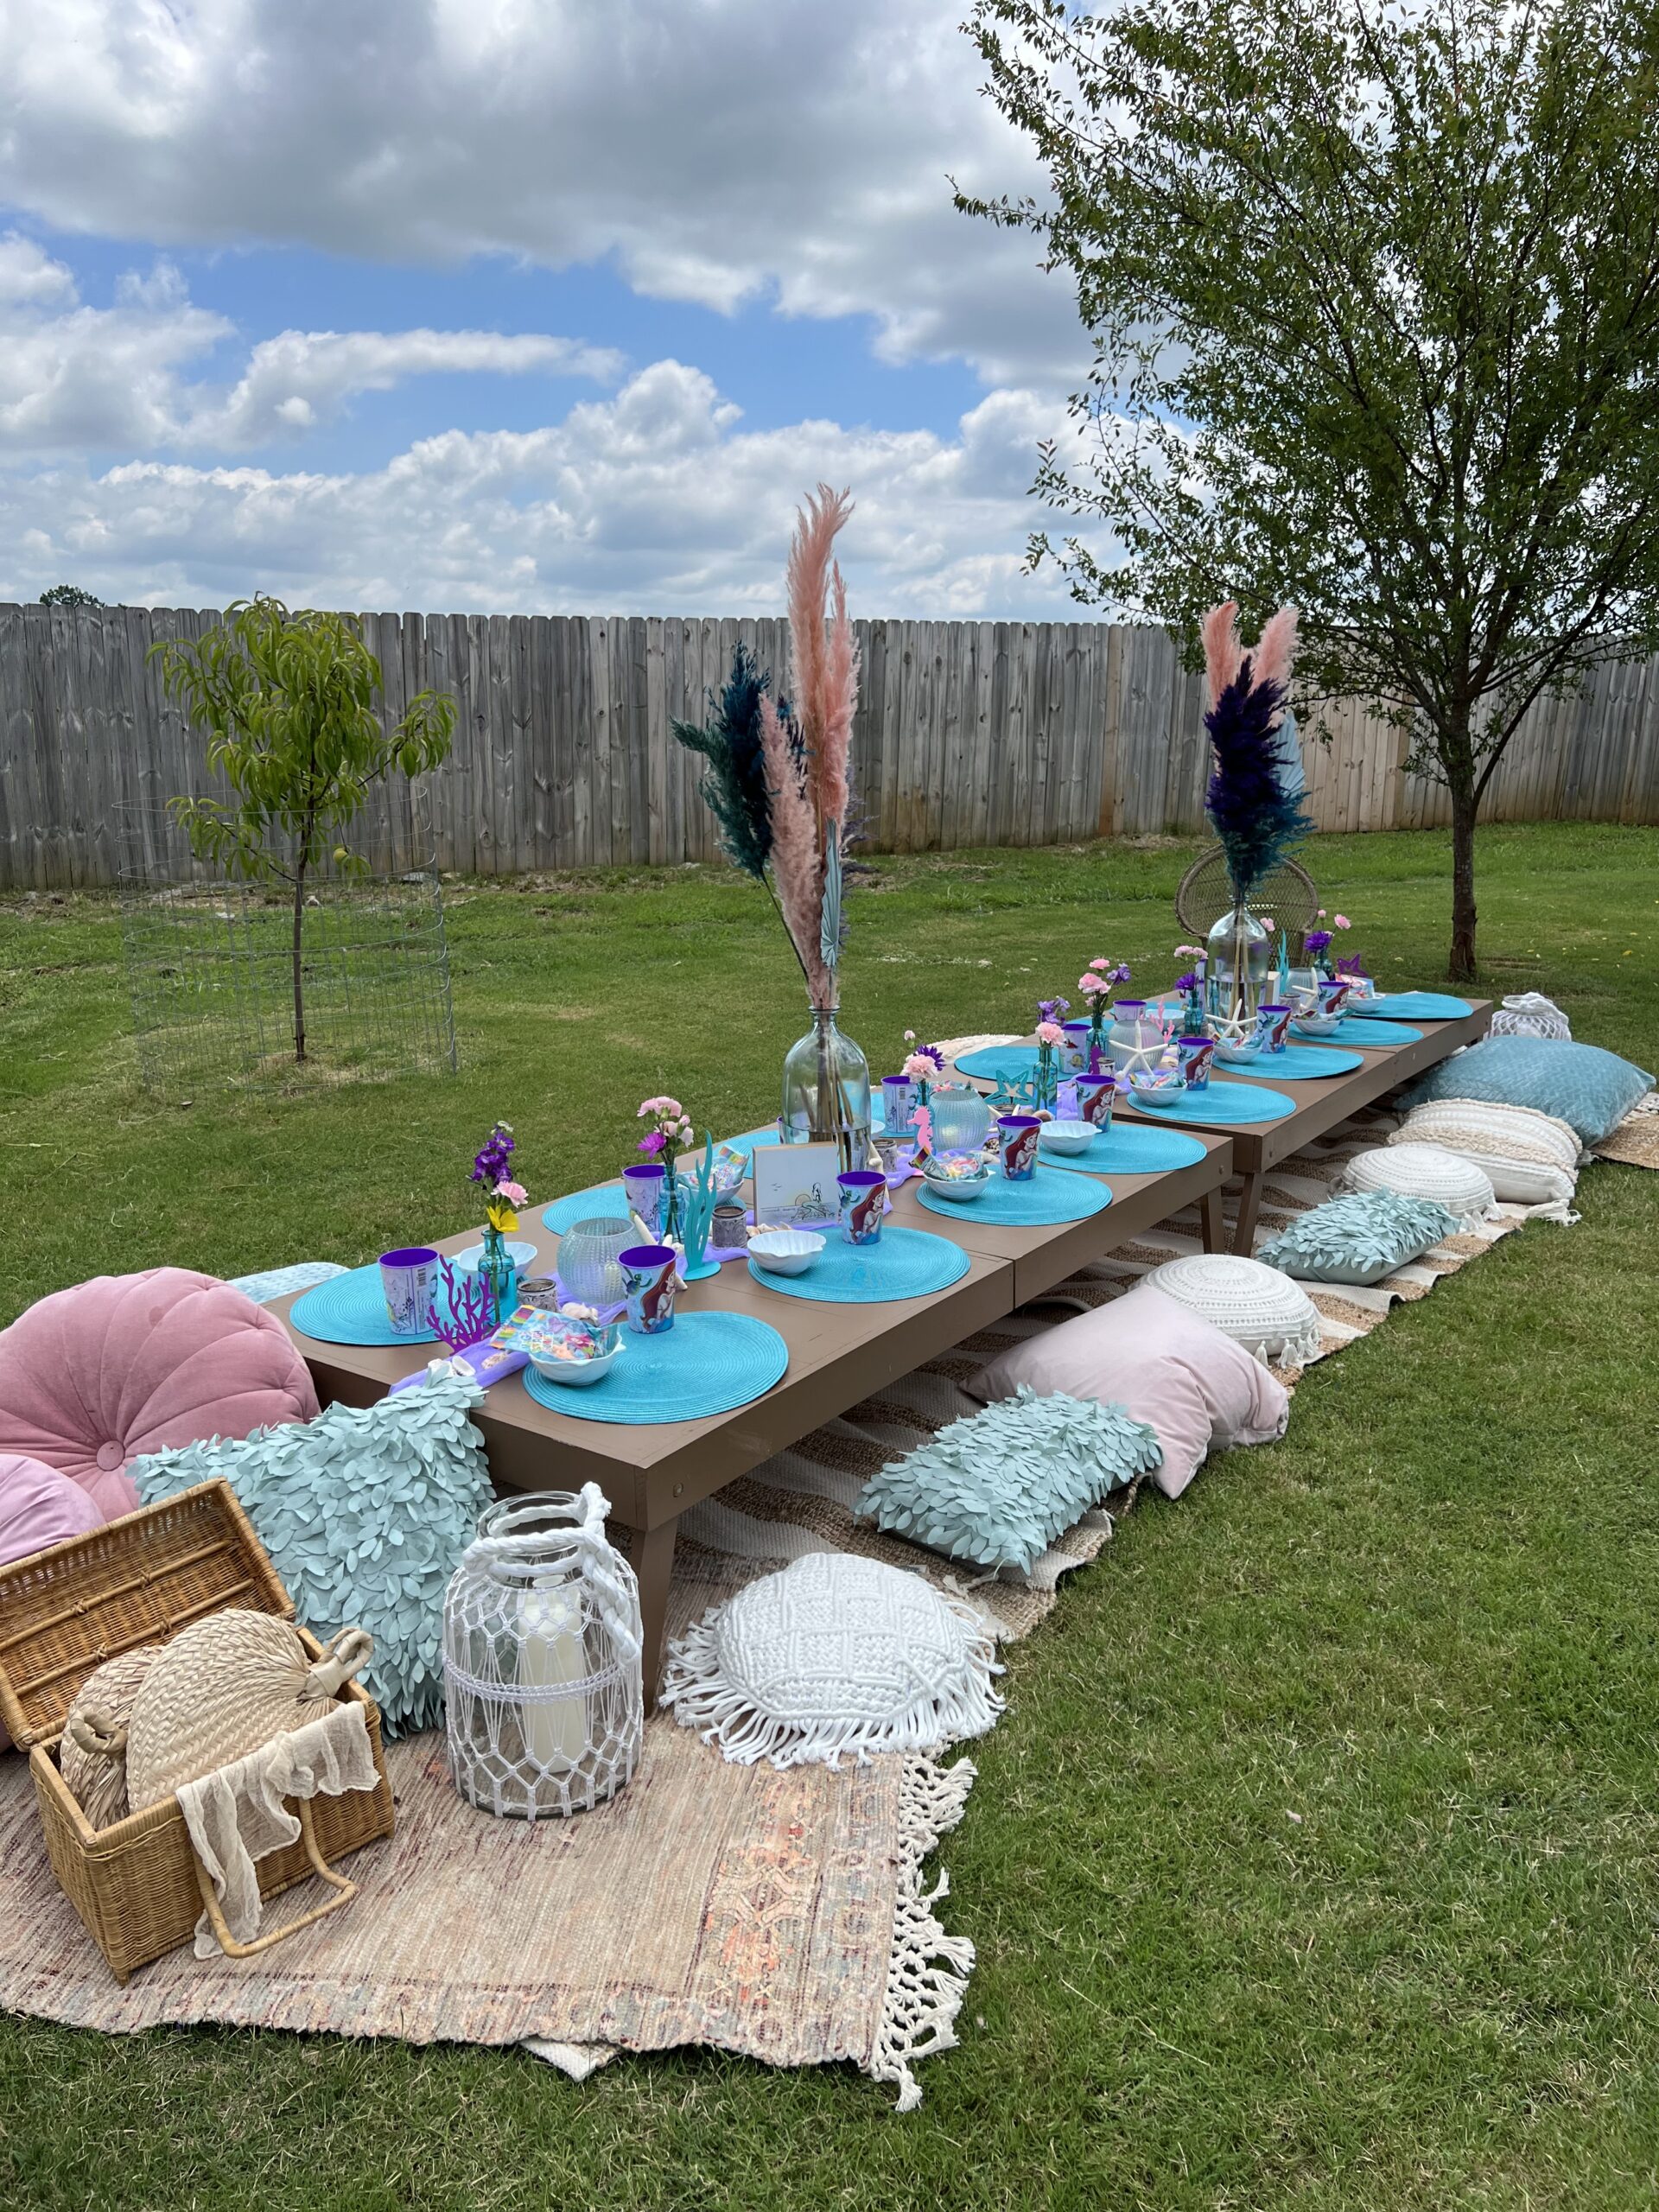 This Little Mermaid Birthday Party is Swimming With Inspiration